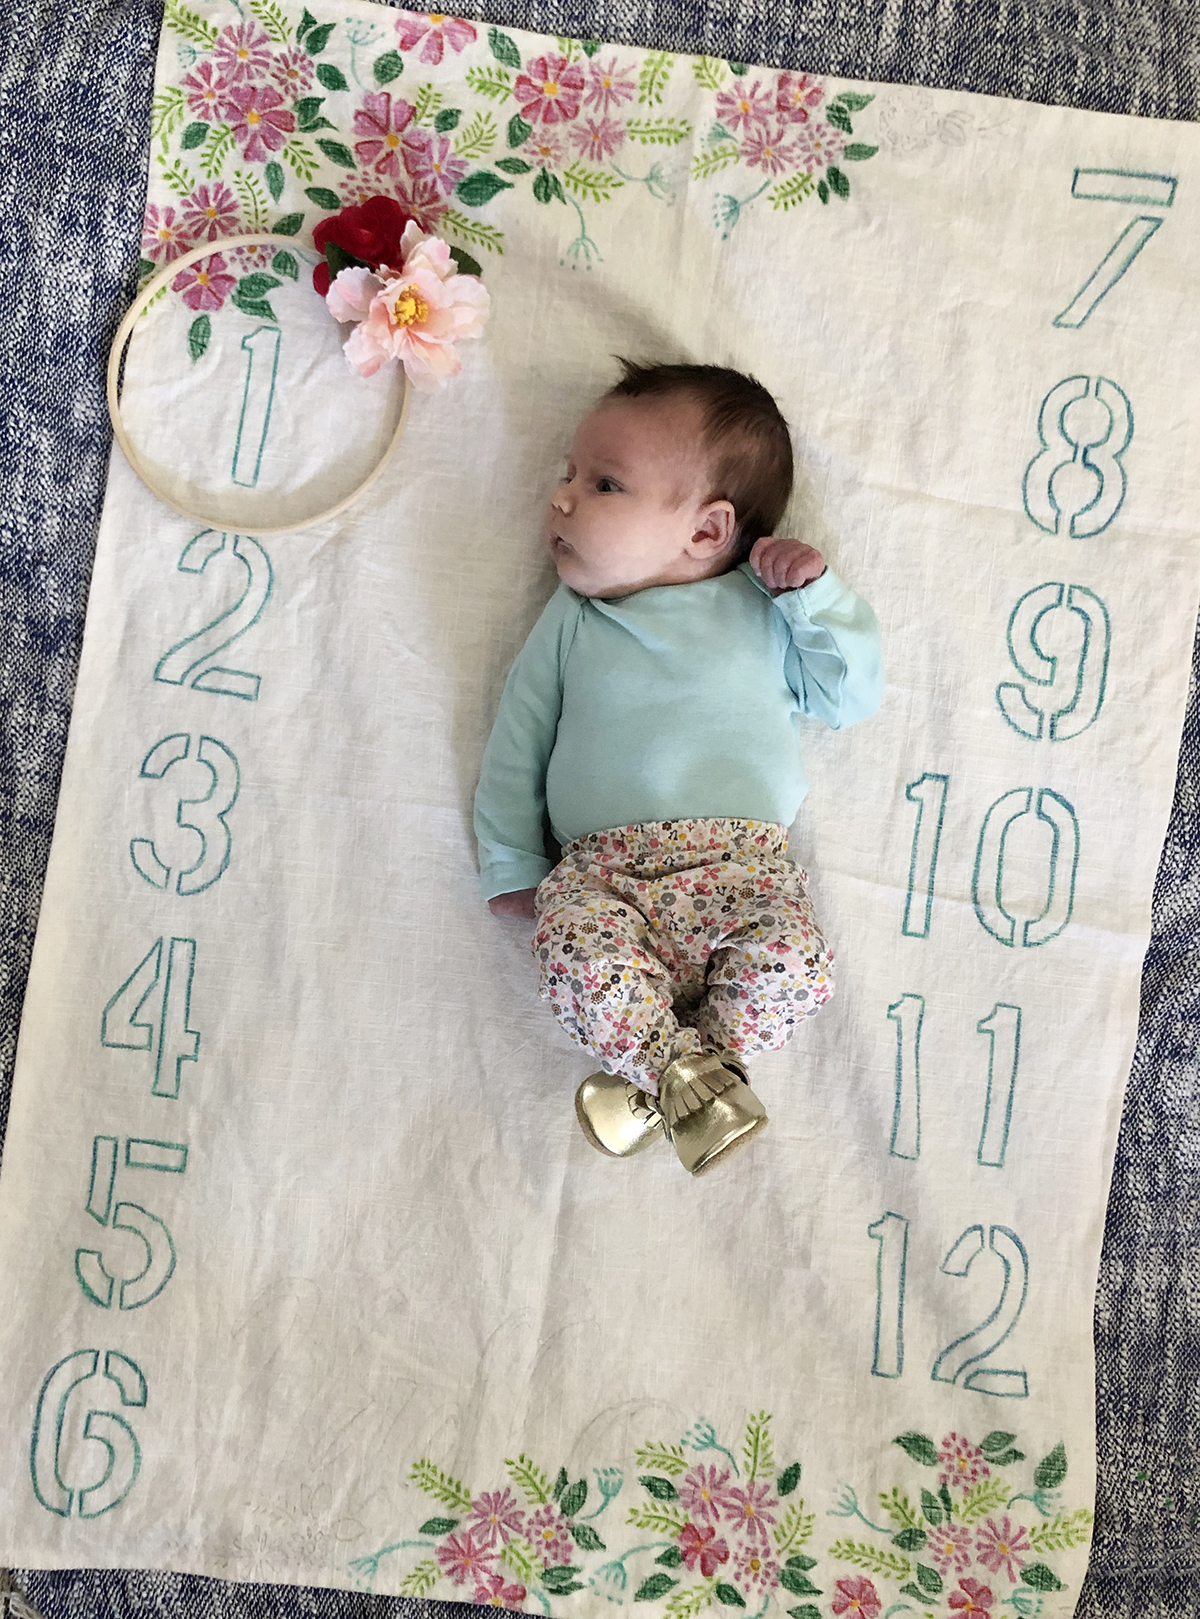 DIY Baby Month Milestone Blanket /// By Faith Provencher of Design Fixation #stencil #baby_shower_gift #diy